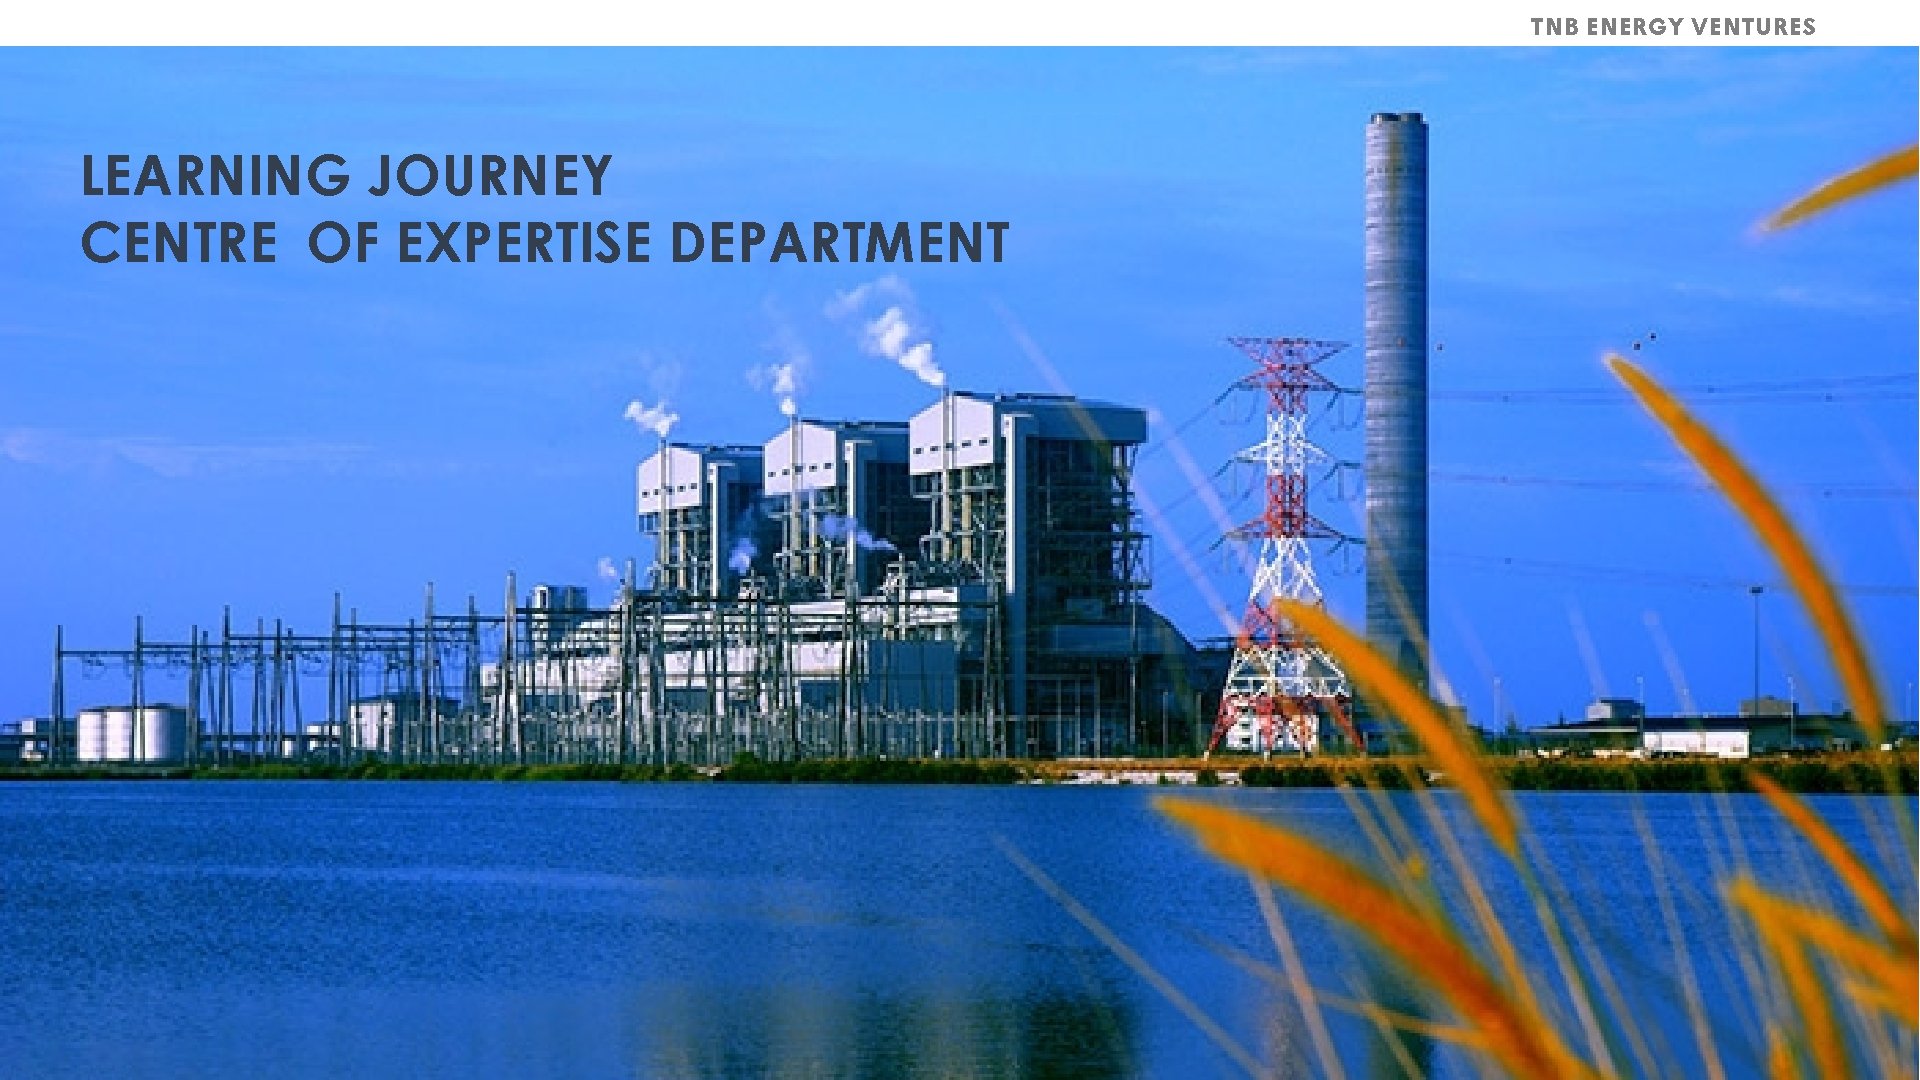 TNB ENERGY VENTURES LEARNING JOURNEY CENTRE OF EXPERTISE DEPARTMENT 